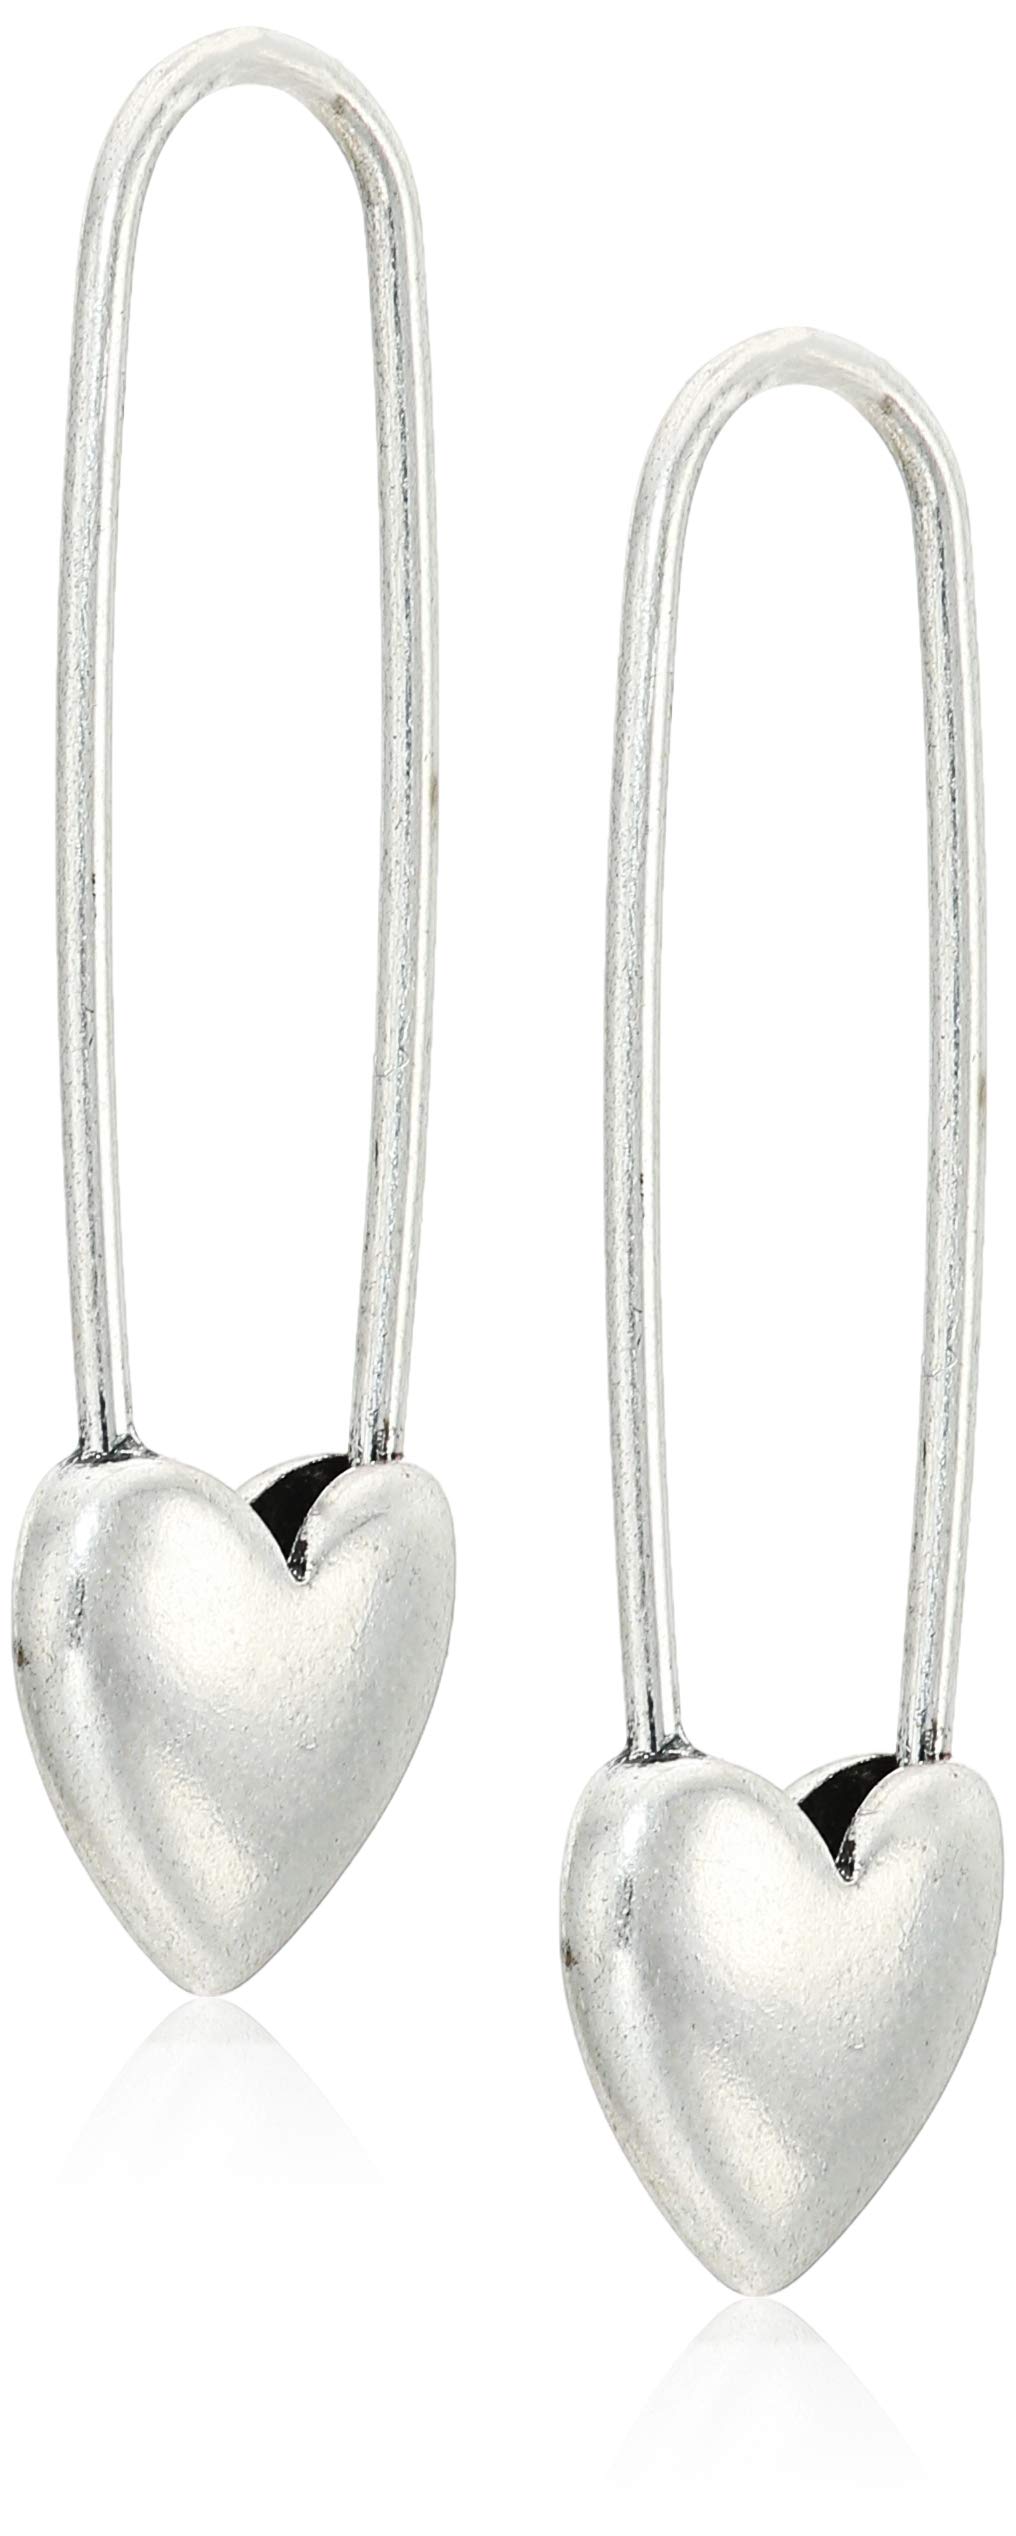 Lucky Brand Women's Heart Safety Pin Earrings, Silver, One Size